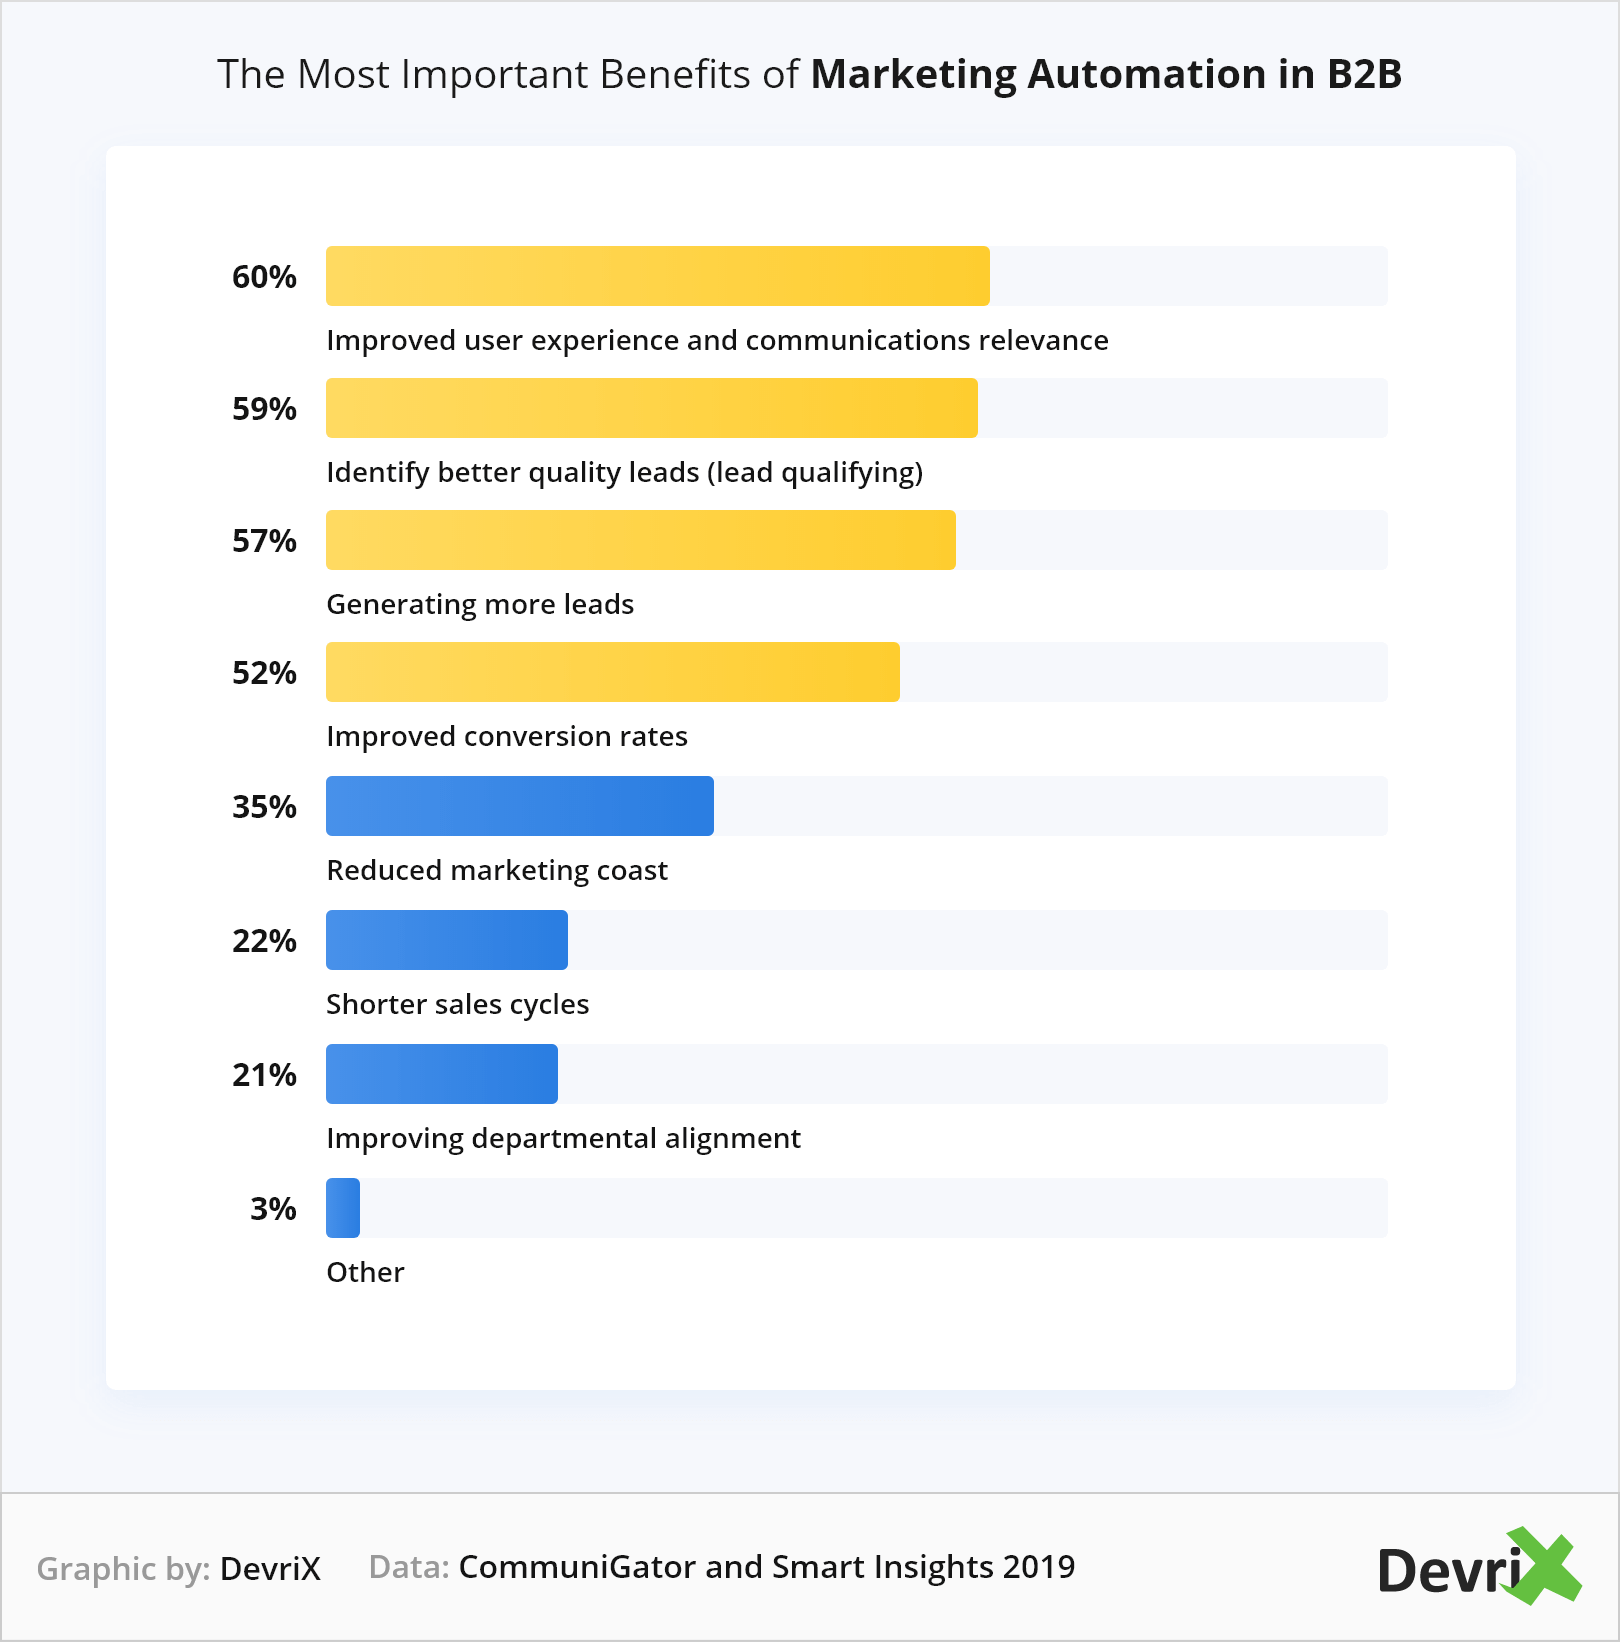 The Most Important Benefits of Marketing Automation in B2B